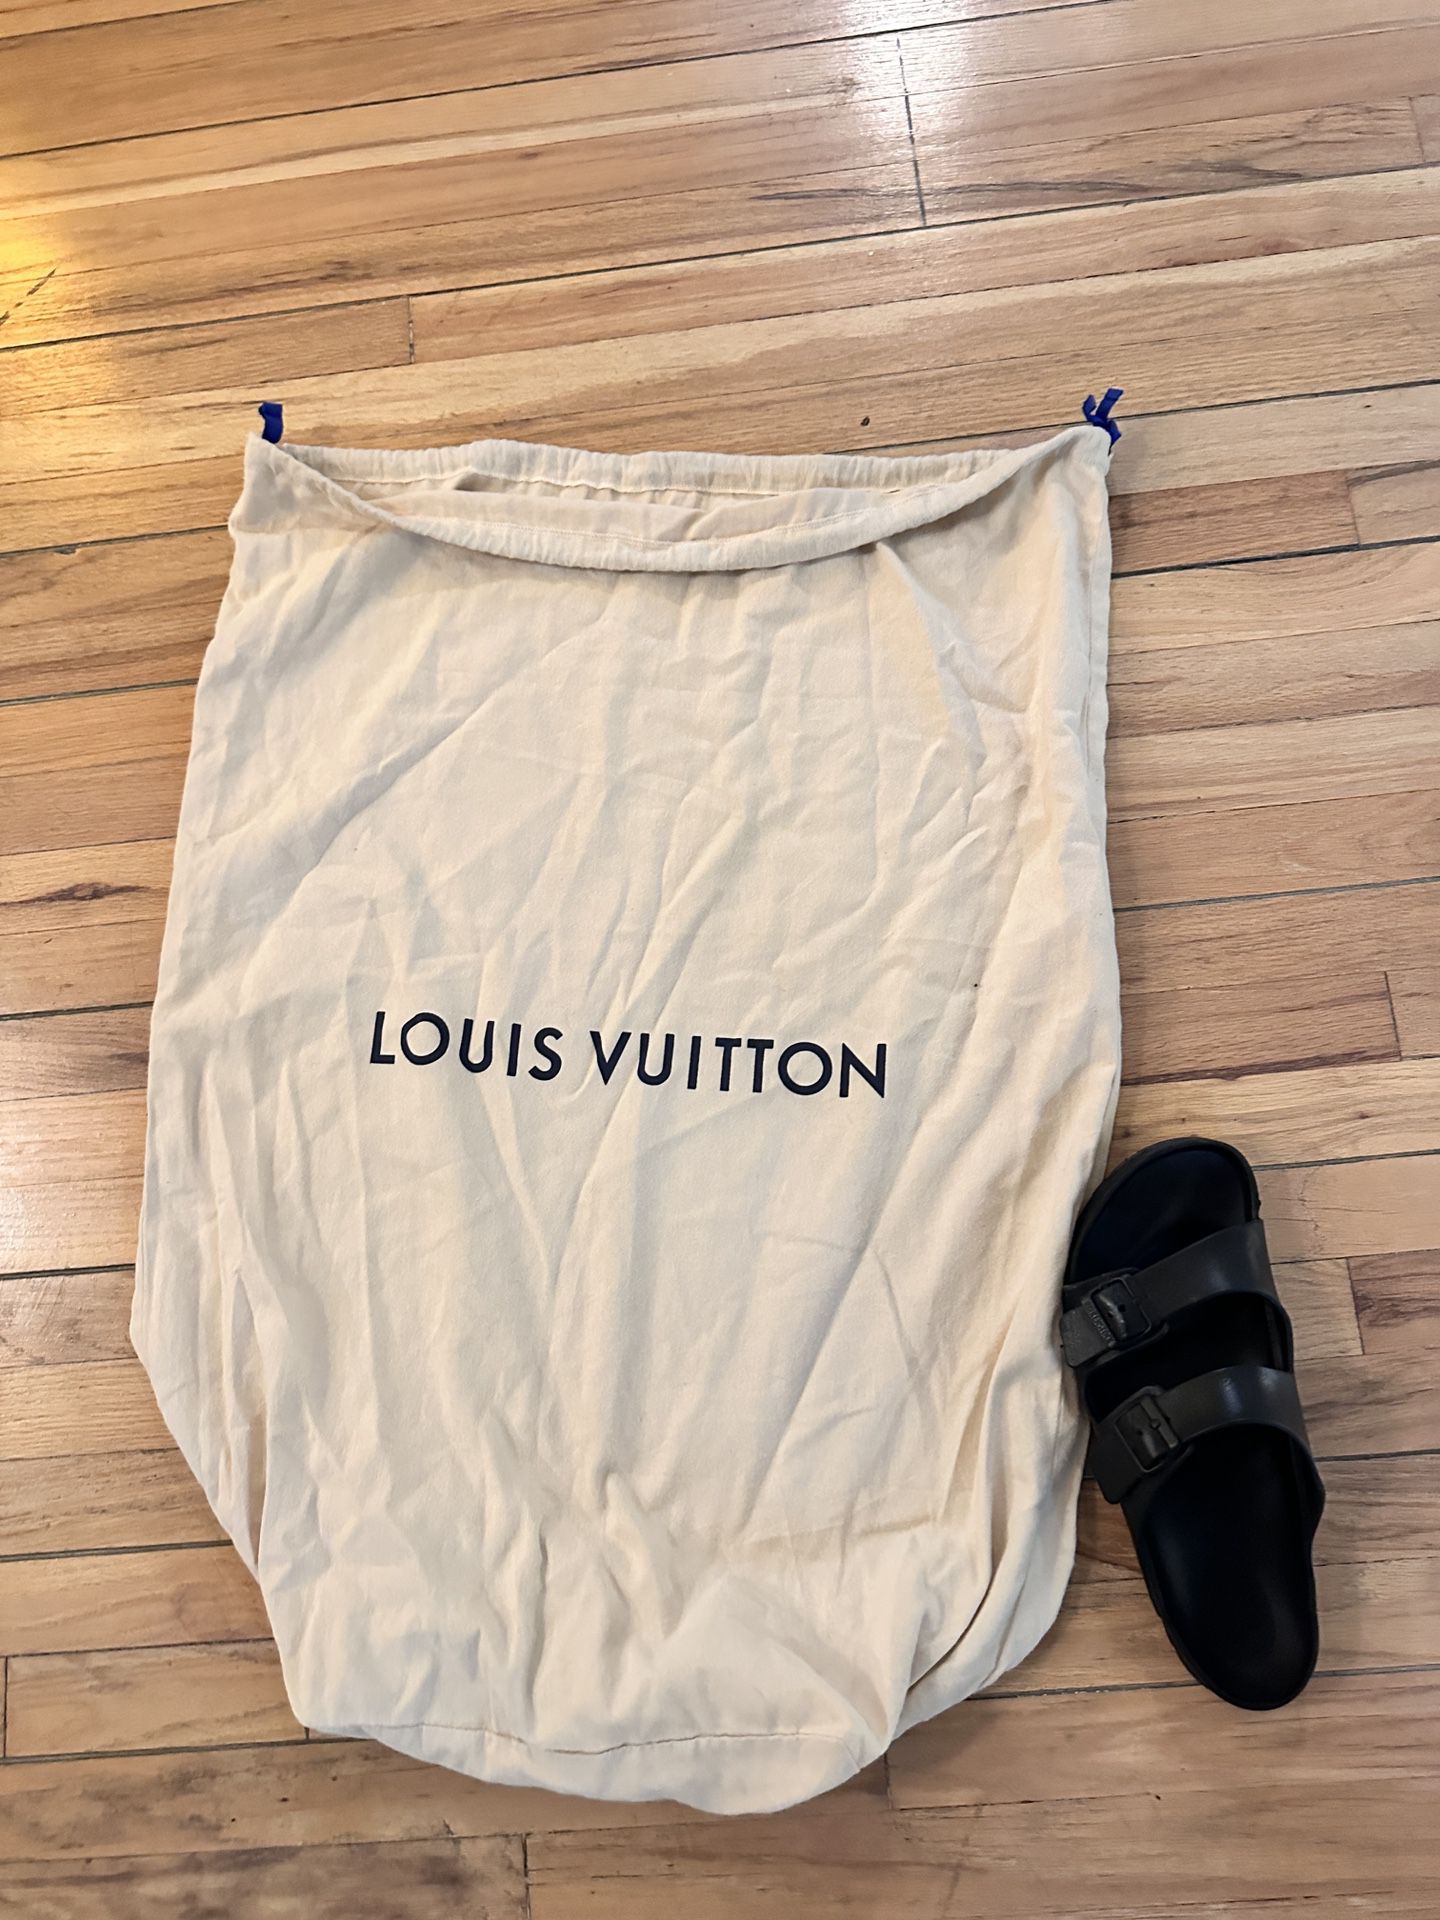 Louis Vuitton Luggage Cloth Bag for Sale in West Hollywood, CA - OfferUp